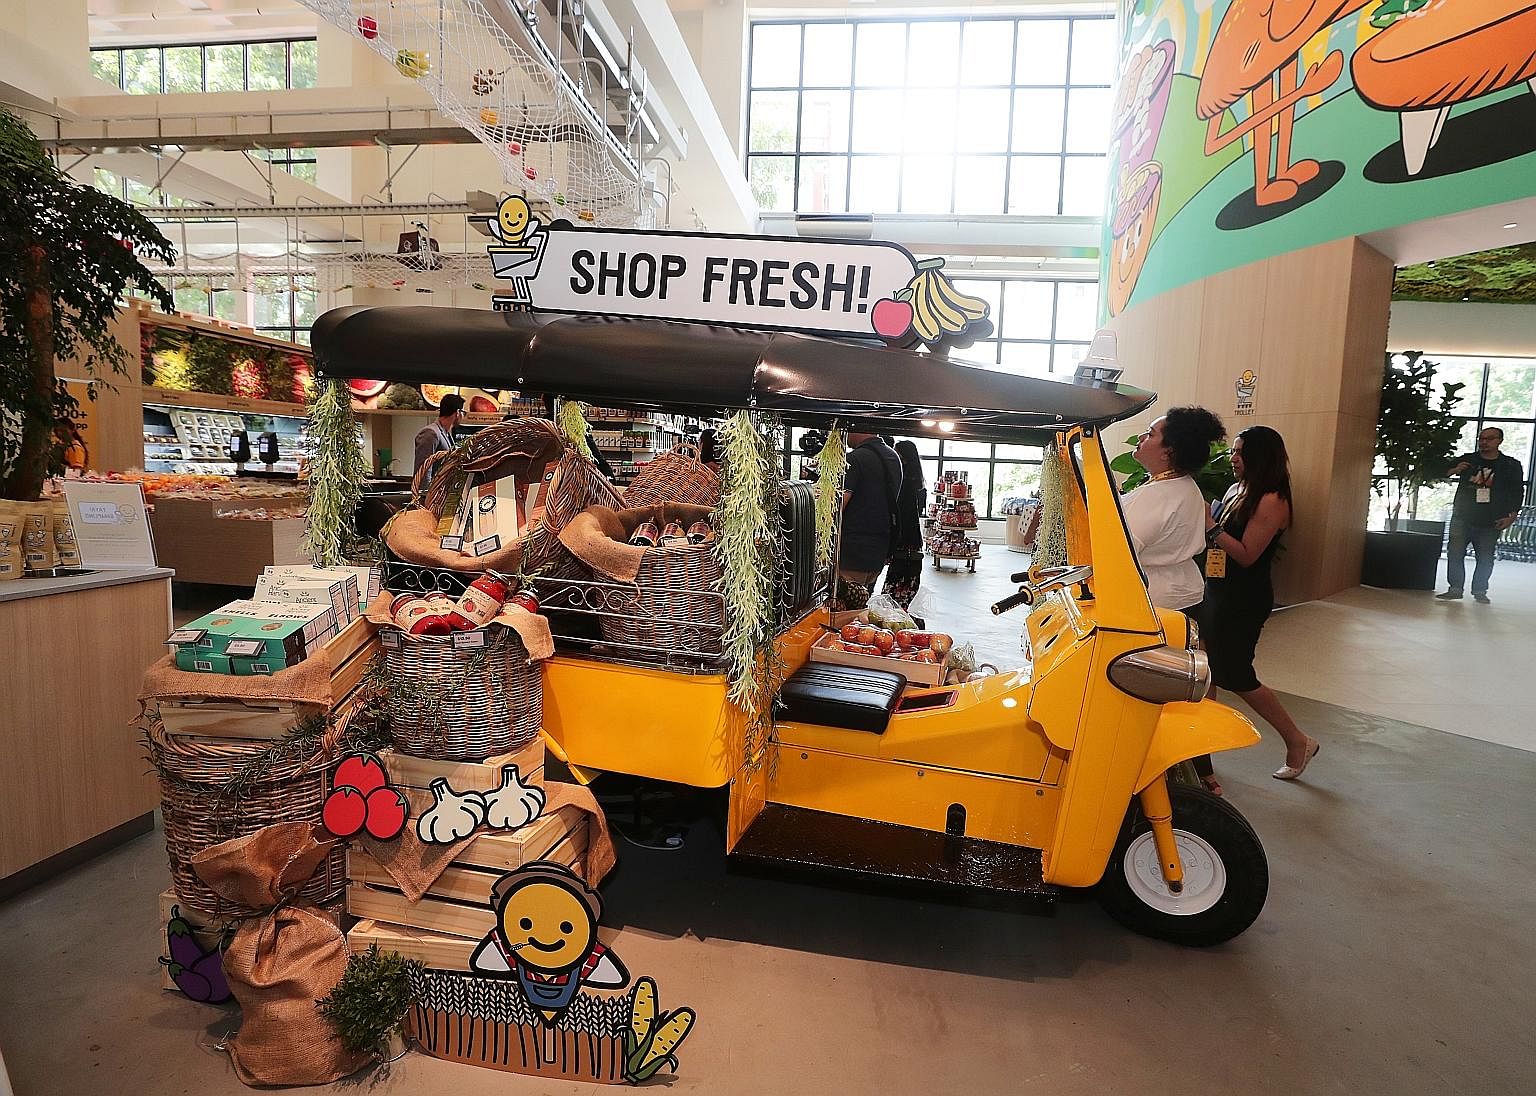 Customers buying 10 or fewer items at the supermarket can use their smartphone to scan each item and pay using the Honestbee app. There will be more than 20,000 products, including fresh produce, seafood and meat on sale when the new Habitat by Hones